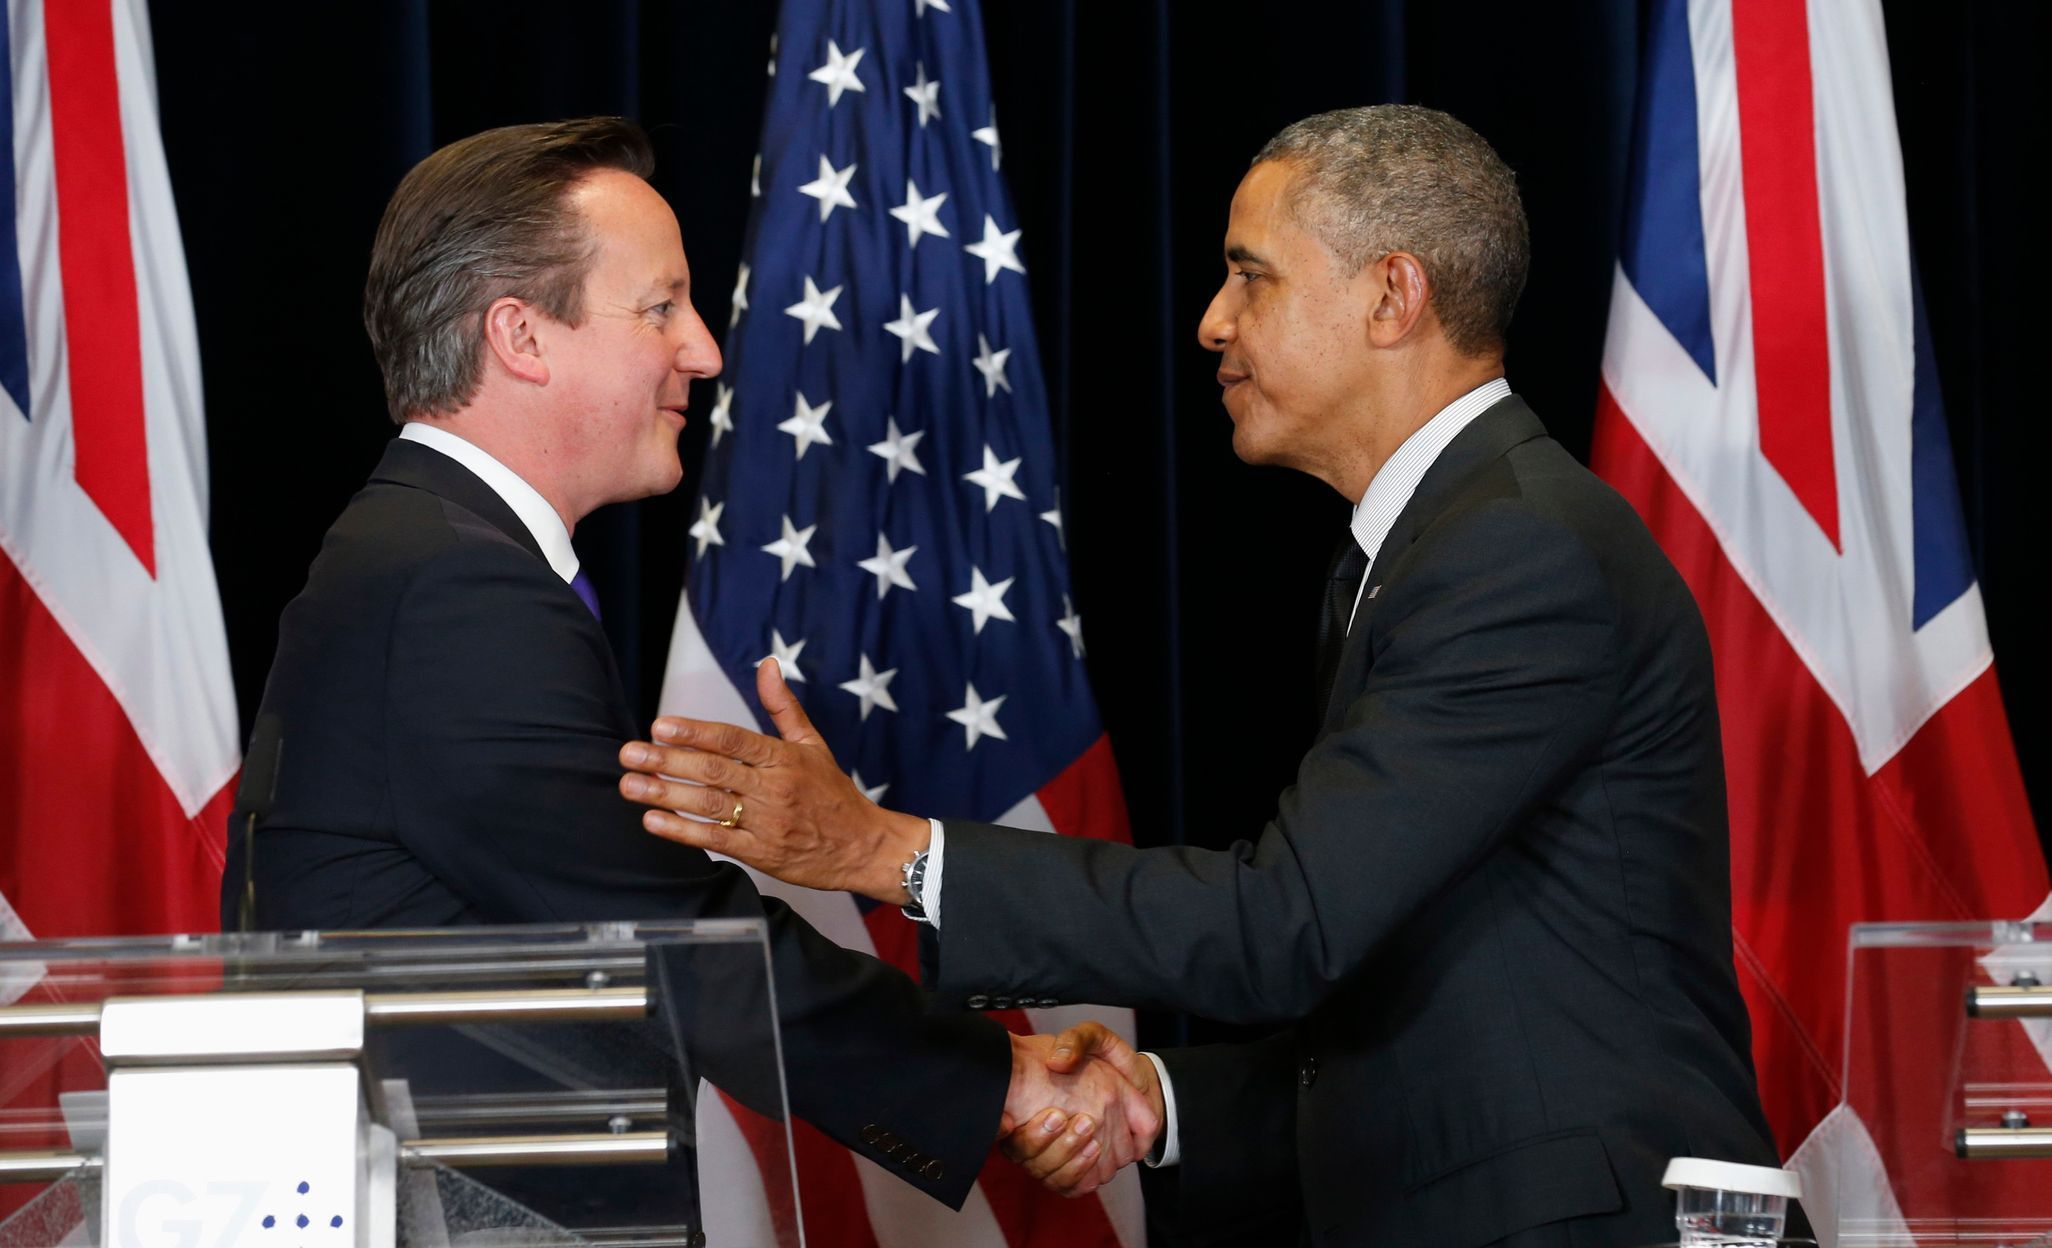 U.S. President Barack Obama and British Prime Minister David Cameron shake hands after holding a news conference at the G7 Summit in Brussels